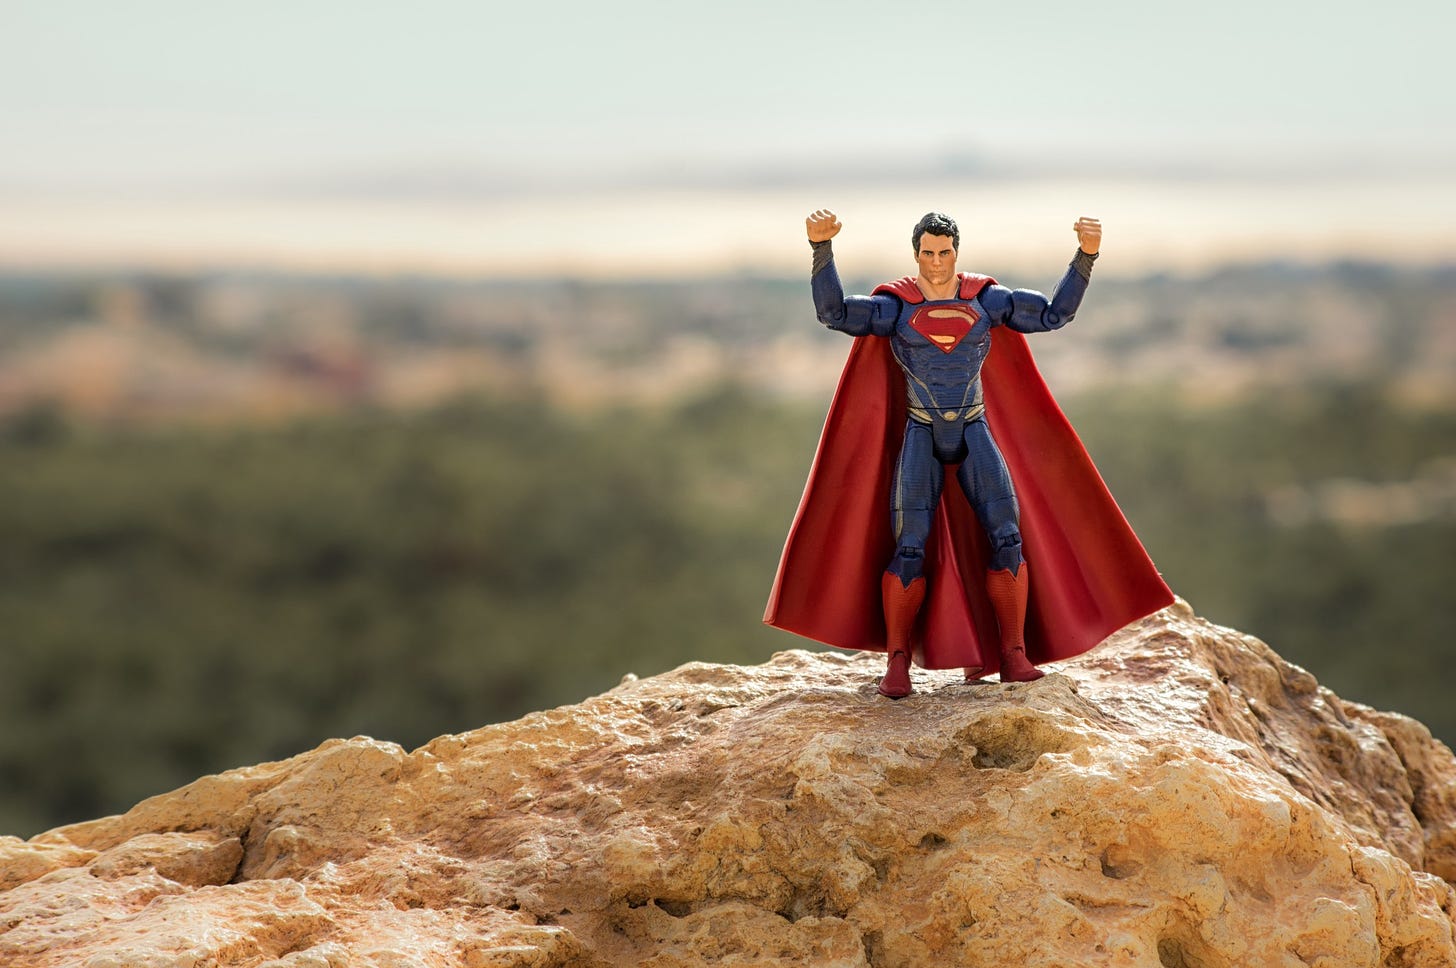 A small Superman toy rests on a rock with its arms raised in the air.